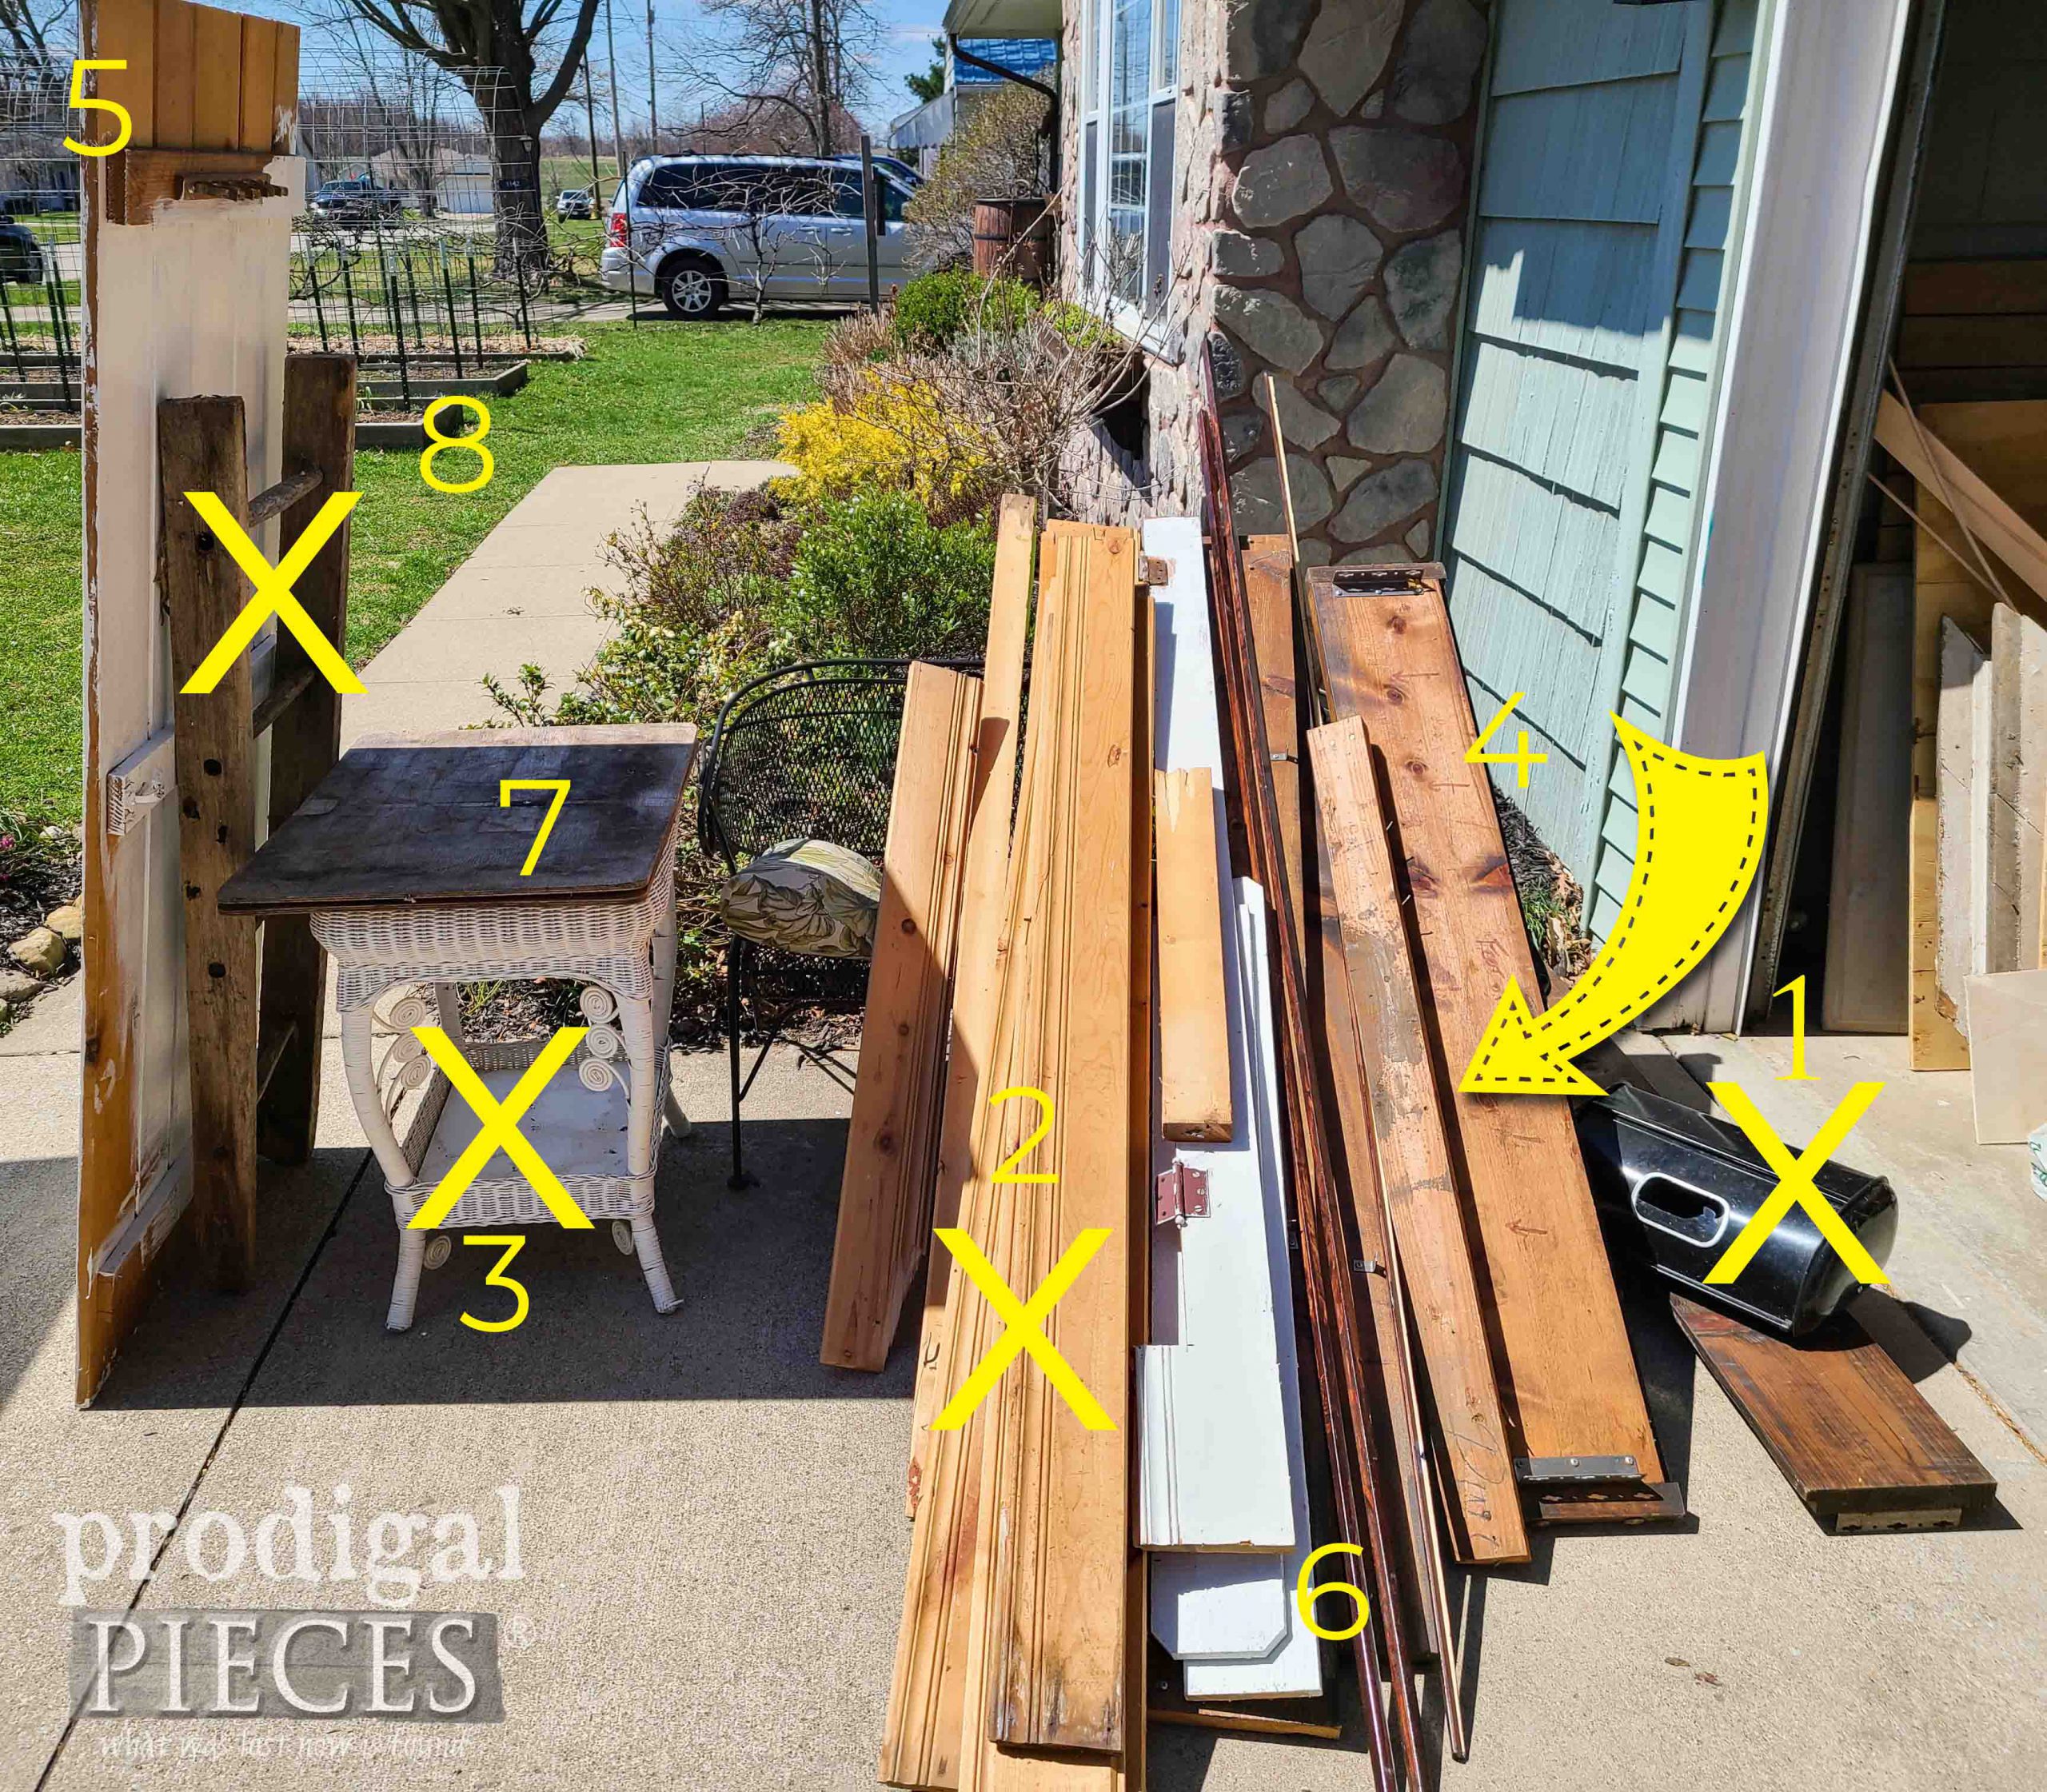 Prodigal Pieces Curbside Haul for DIY Weight Rack| prodigalpieces.com #prodigalpieces